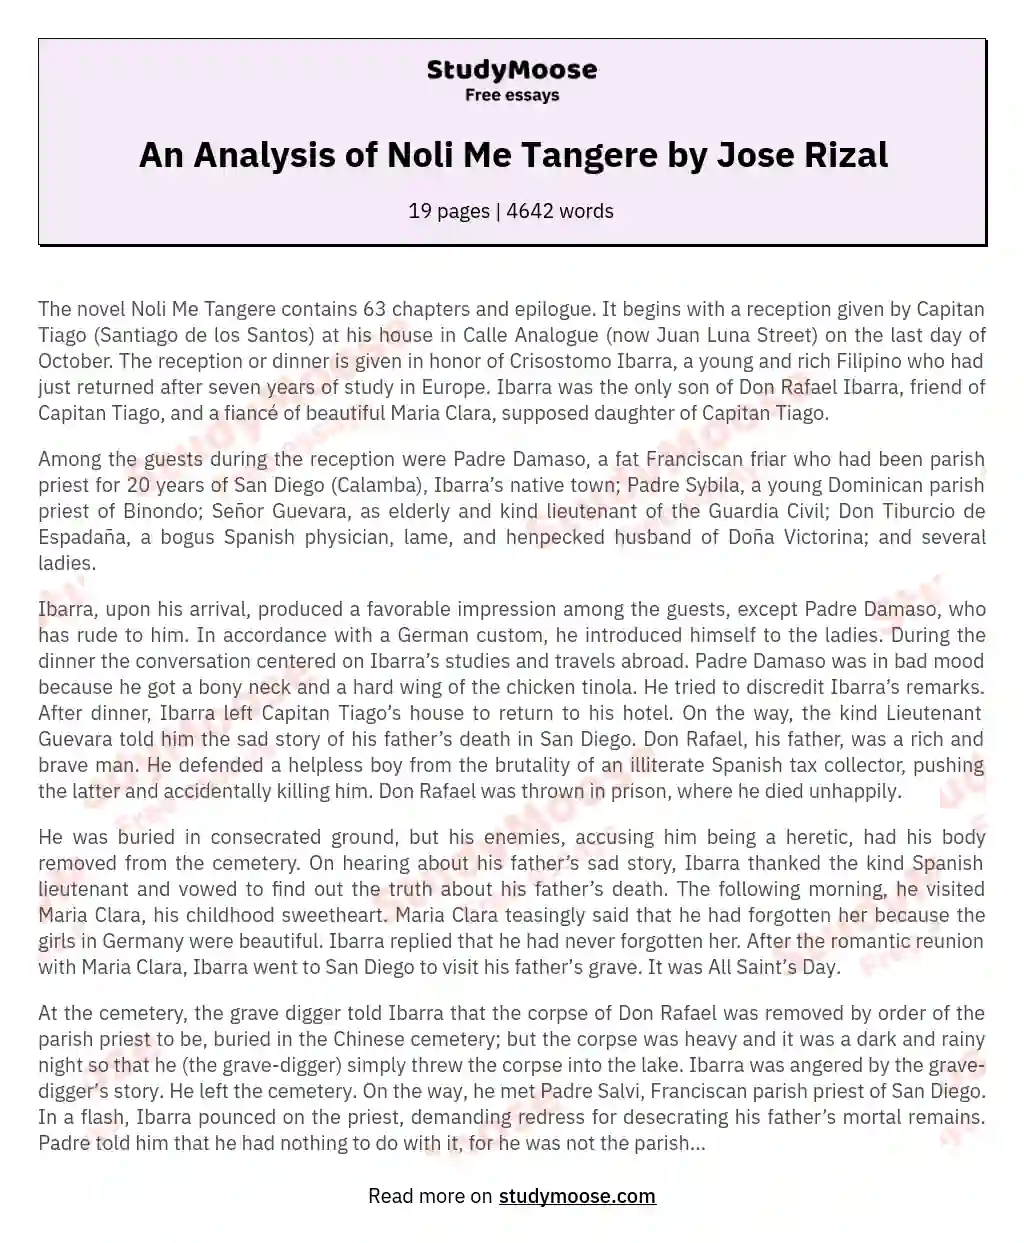 An Analysis of Noli Me Tangere by Jose Rizal essay